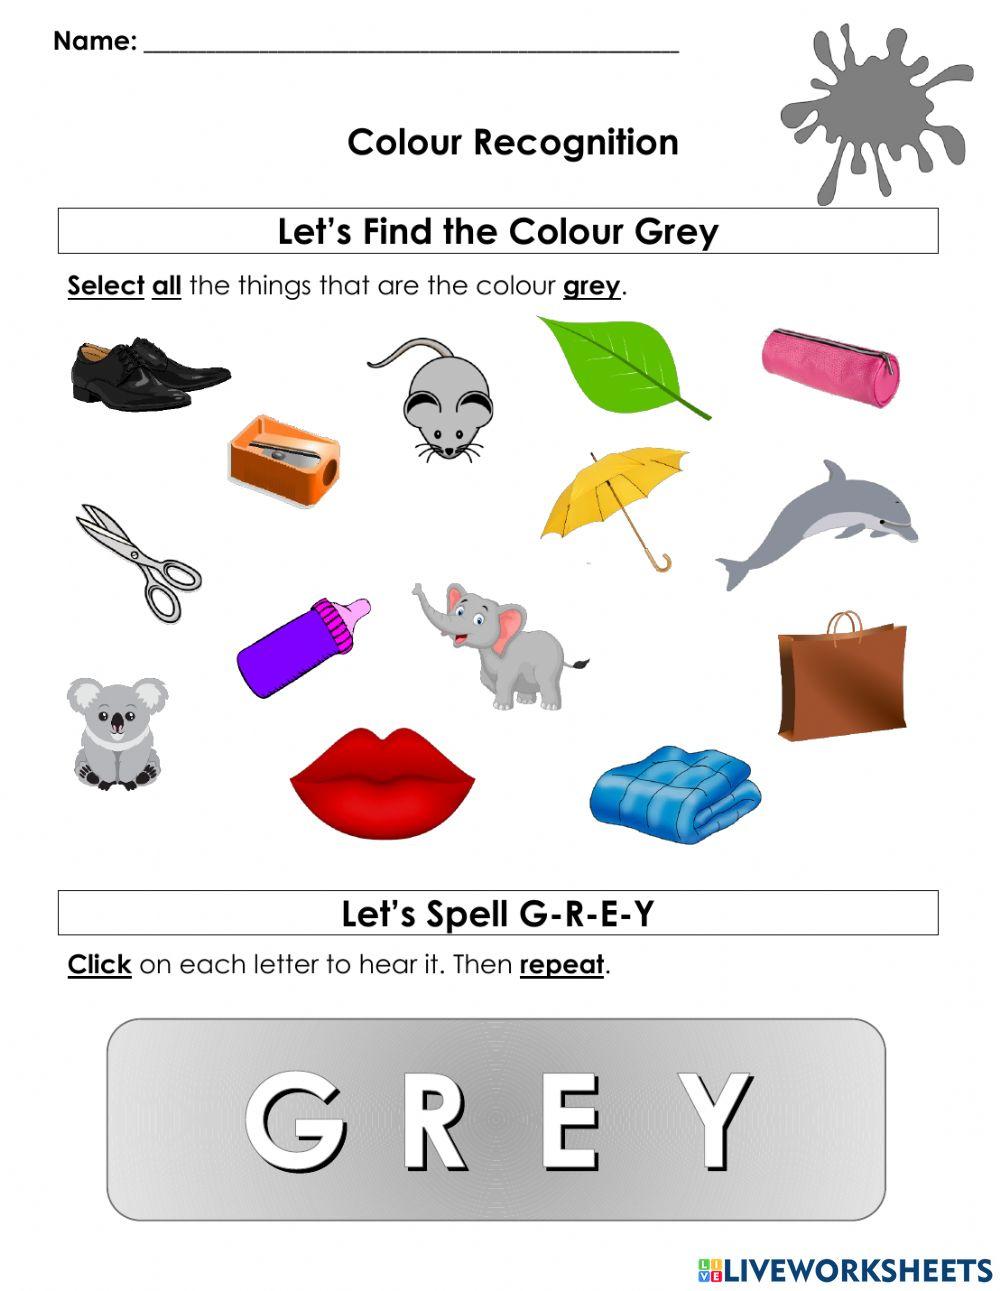 Is It Gray or Grey? How to Spell the Color